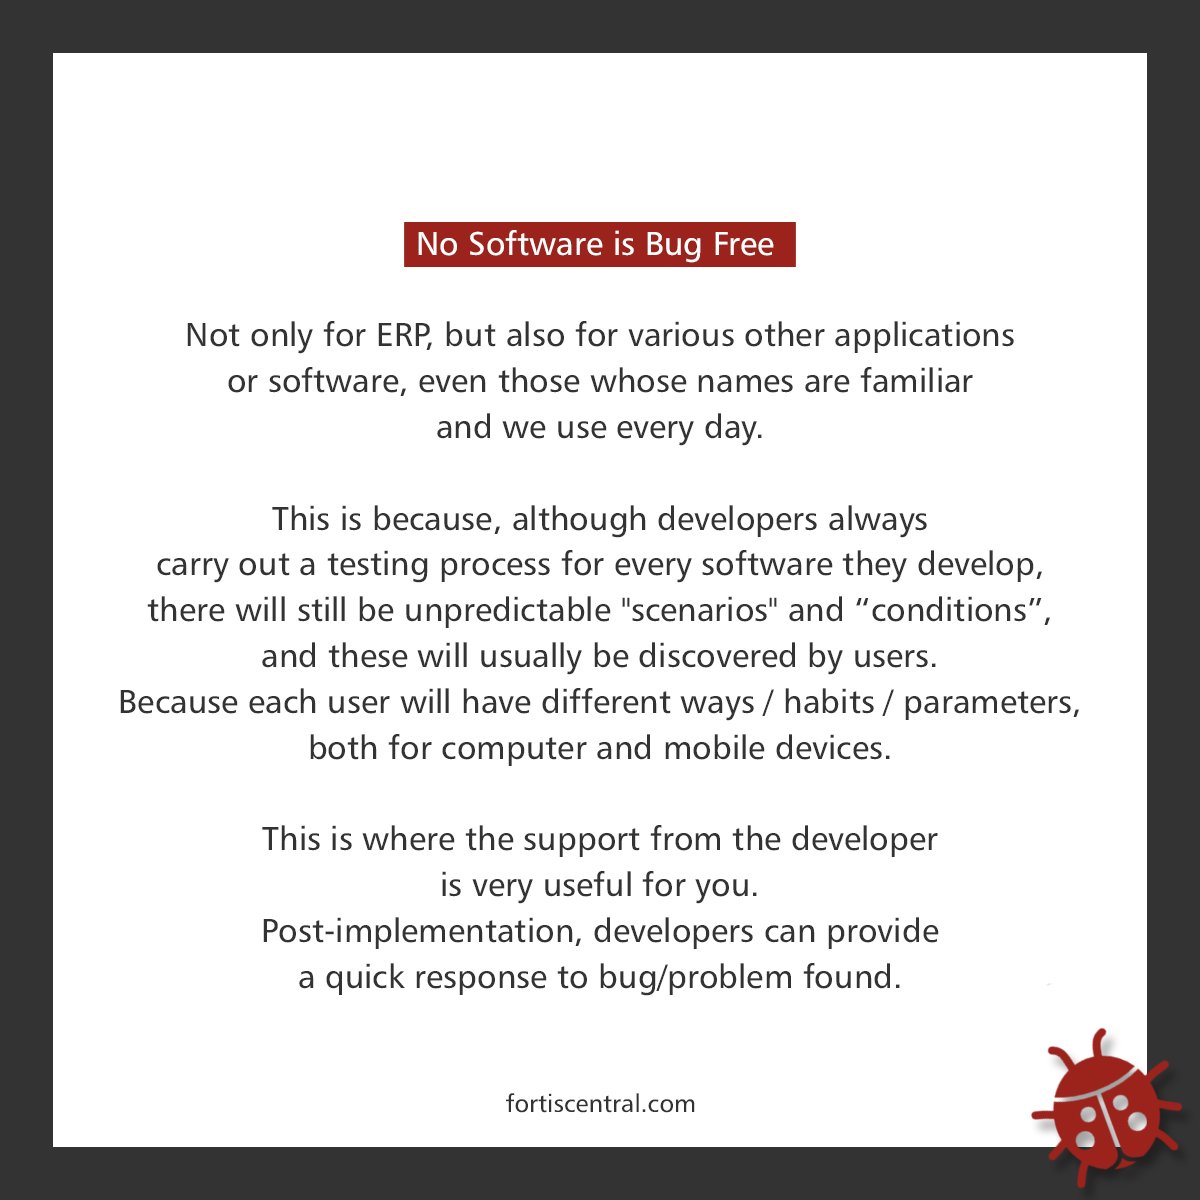 'Users at my company are still finding bugs in the software we use. Can't developers provide us with bug-free software?' 

#softwarecompany #softwarehouse #softwaredeveloper #softwarebugs #support